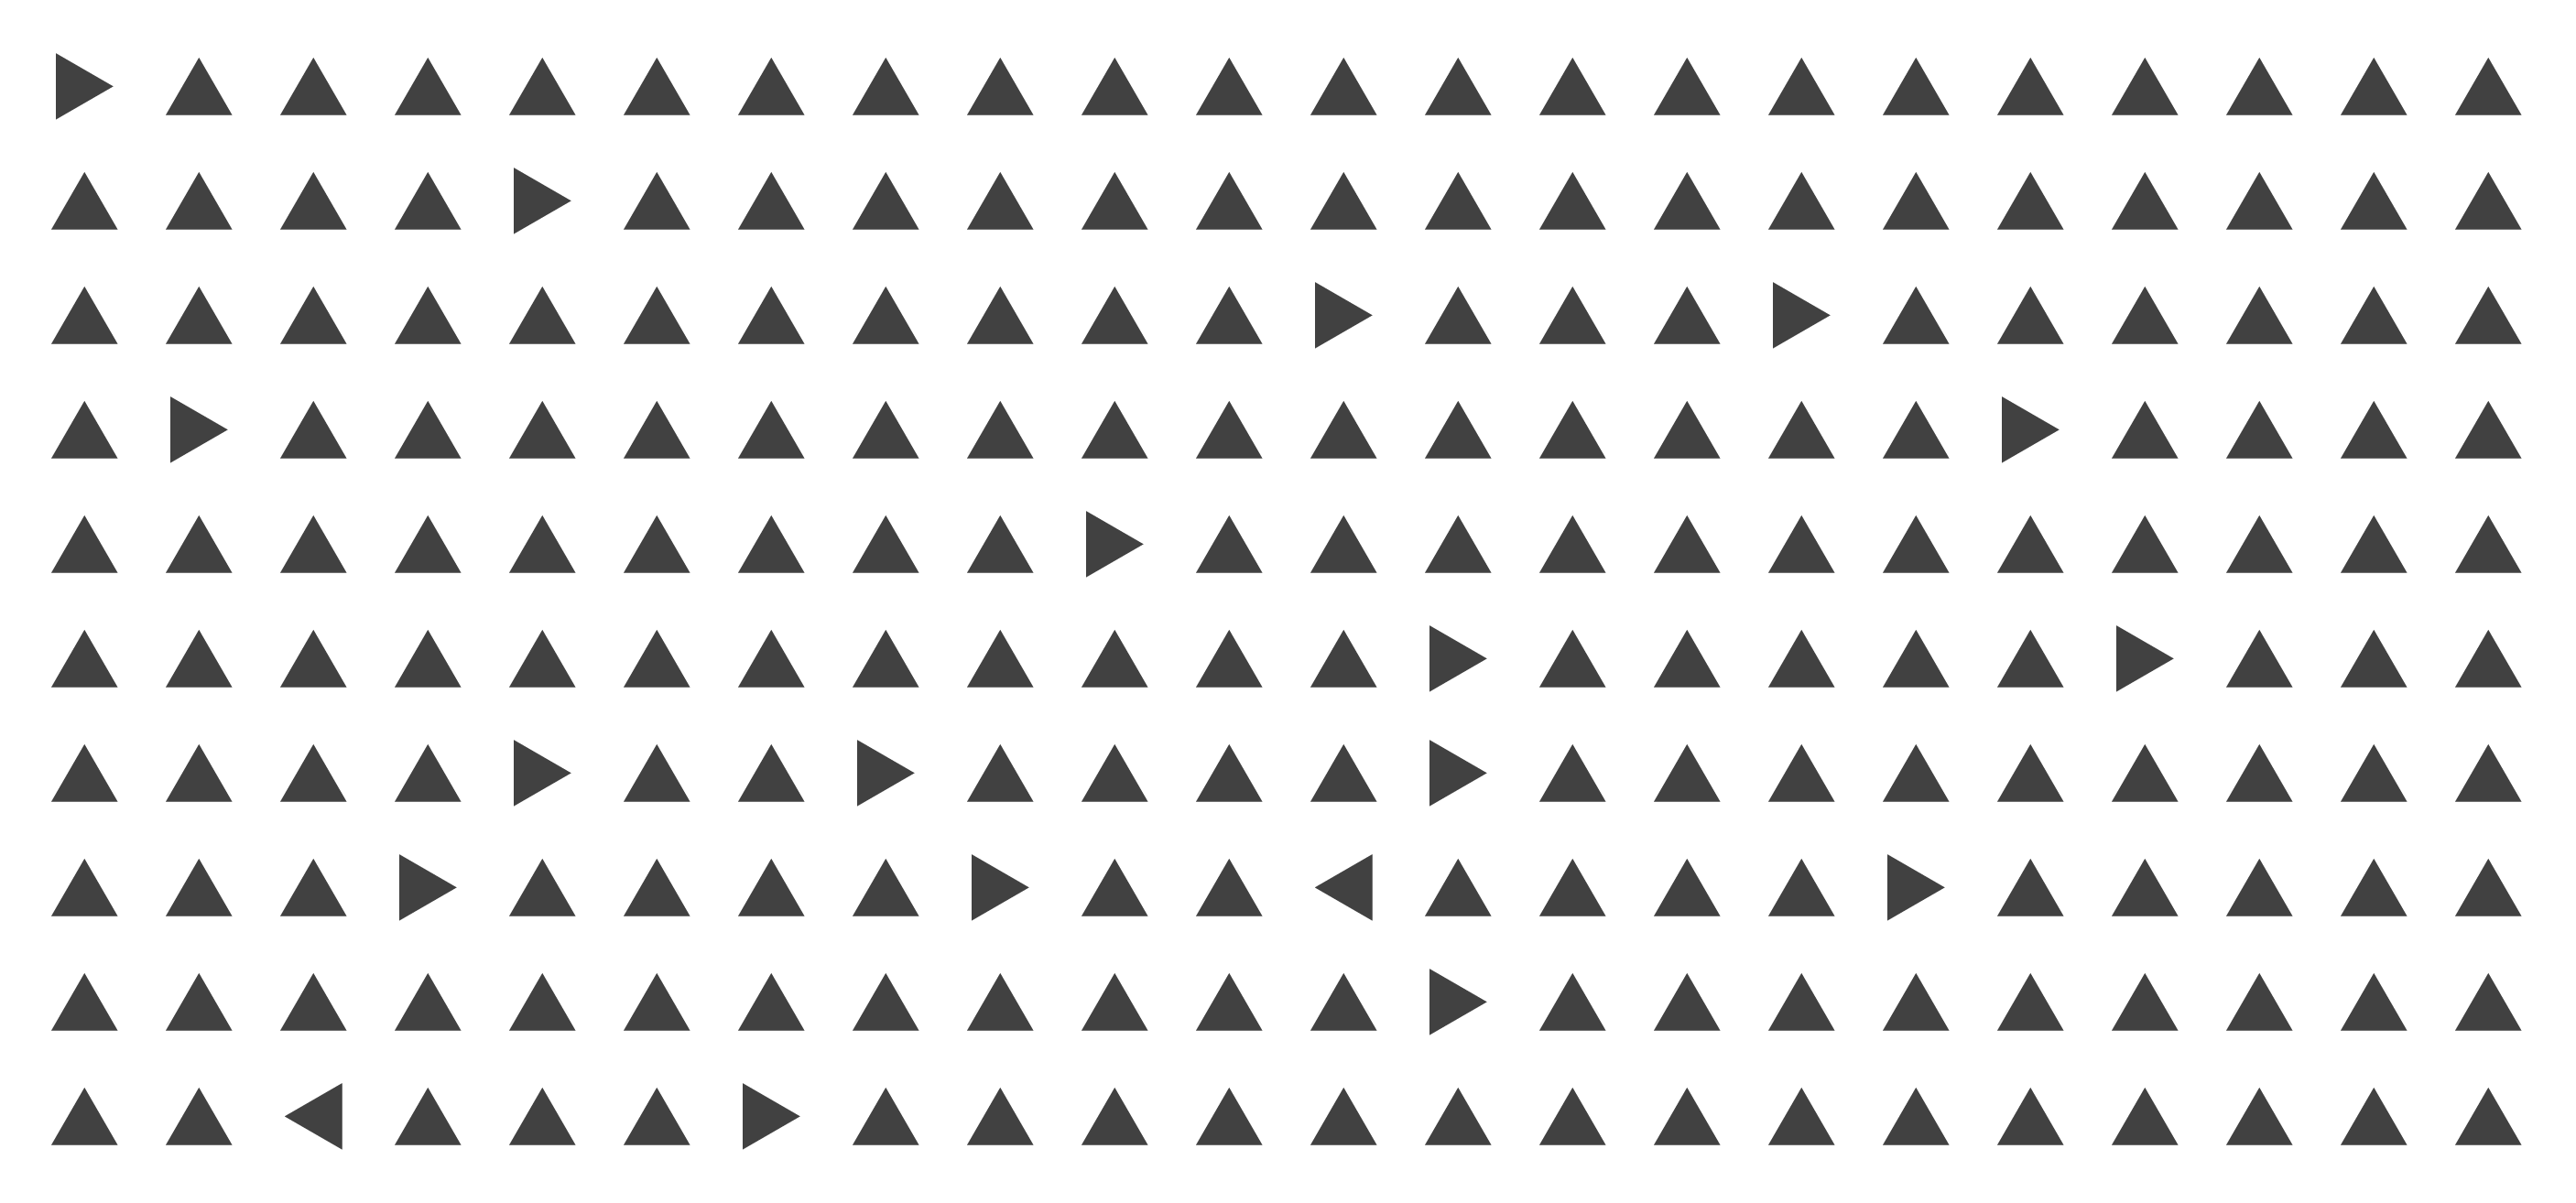 A series of triangles with only one pointing to the left but coloured differently. It's much easier to point out the odd one out now because it's differentiated by both colour and direction.